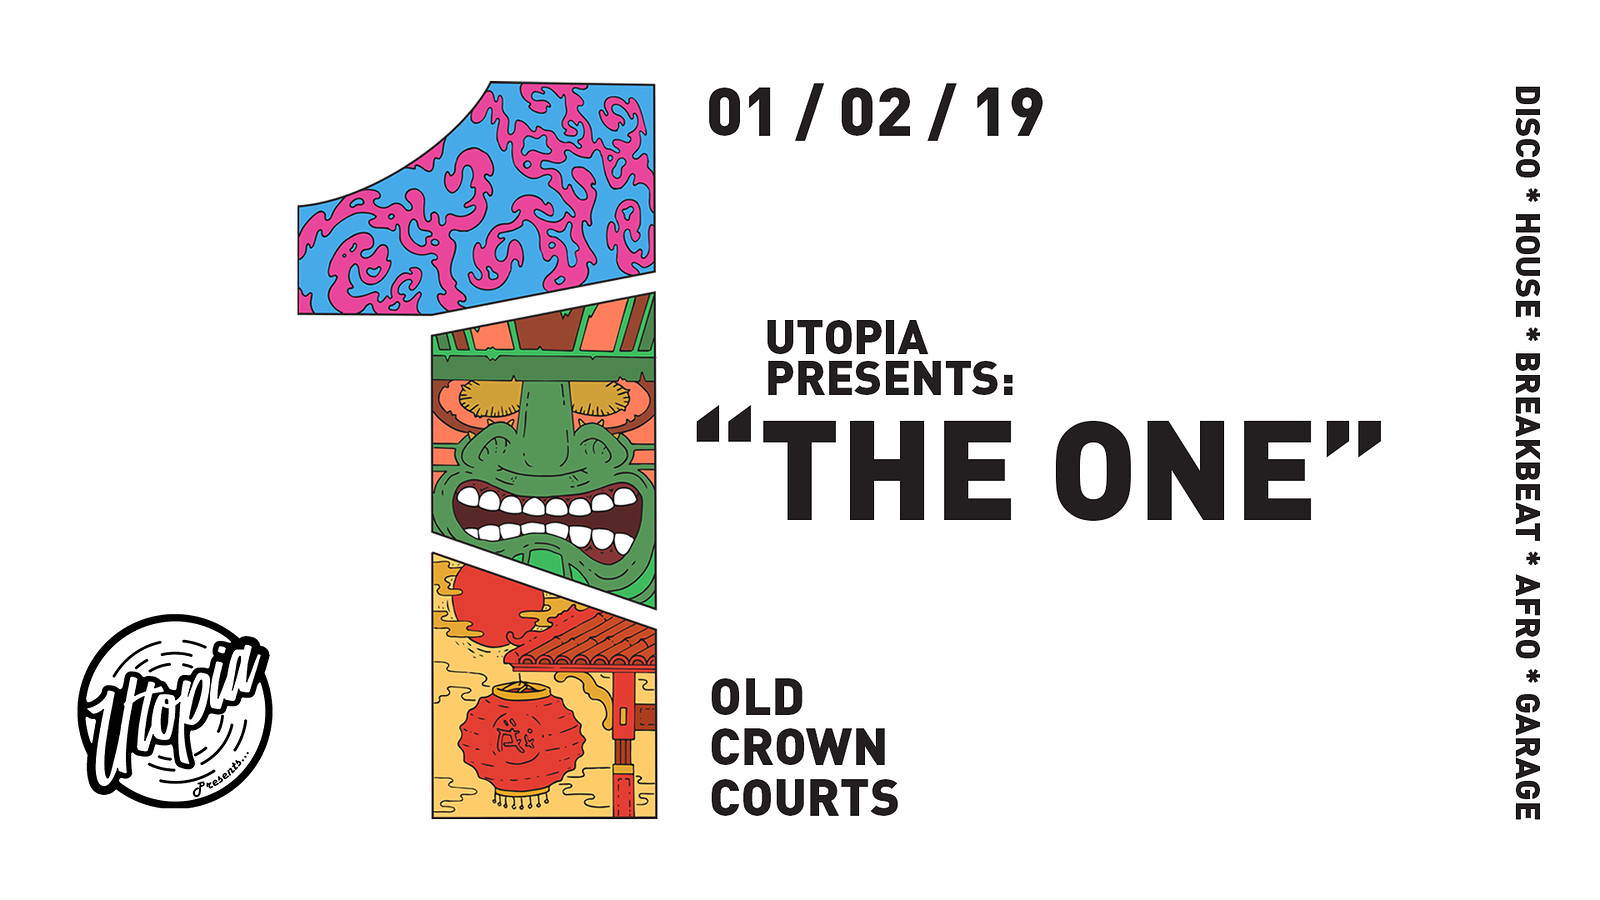 Utopia Presents: The One at The Old Crown Courts